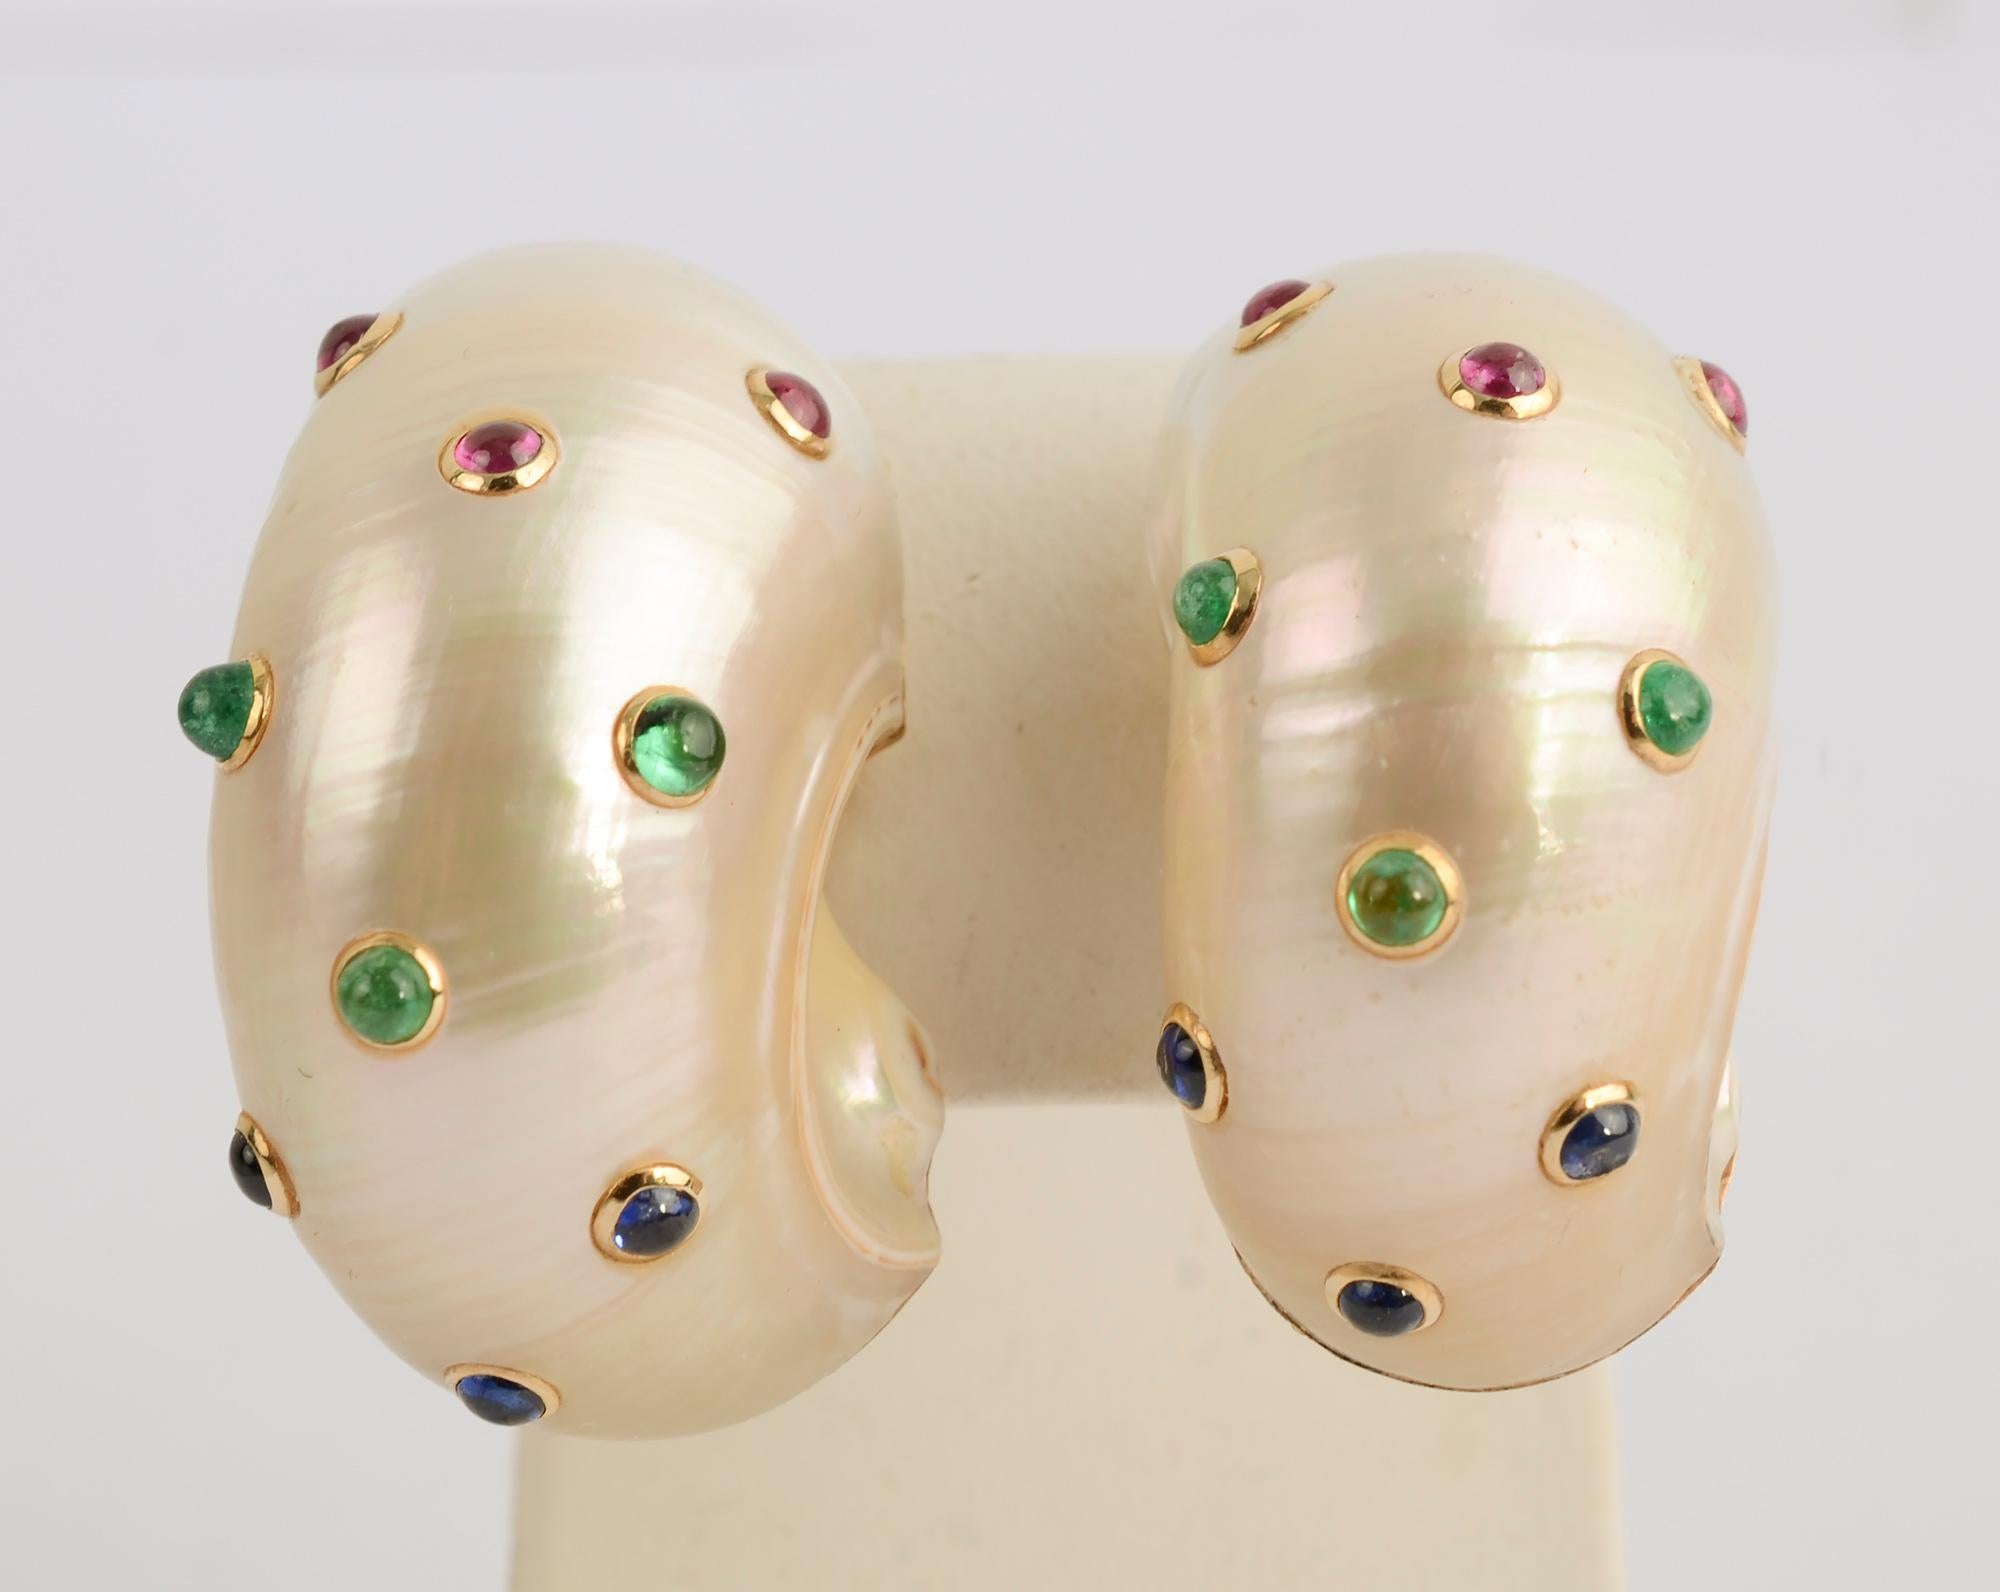 Large and voluptuous shell earrings by Trianon that are studded with cabochon rubies; sapphires and emeralds. The earrings measure 5/8